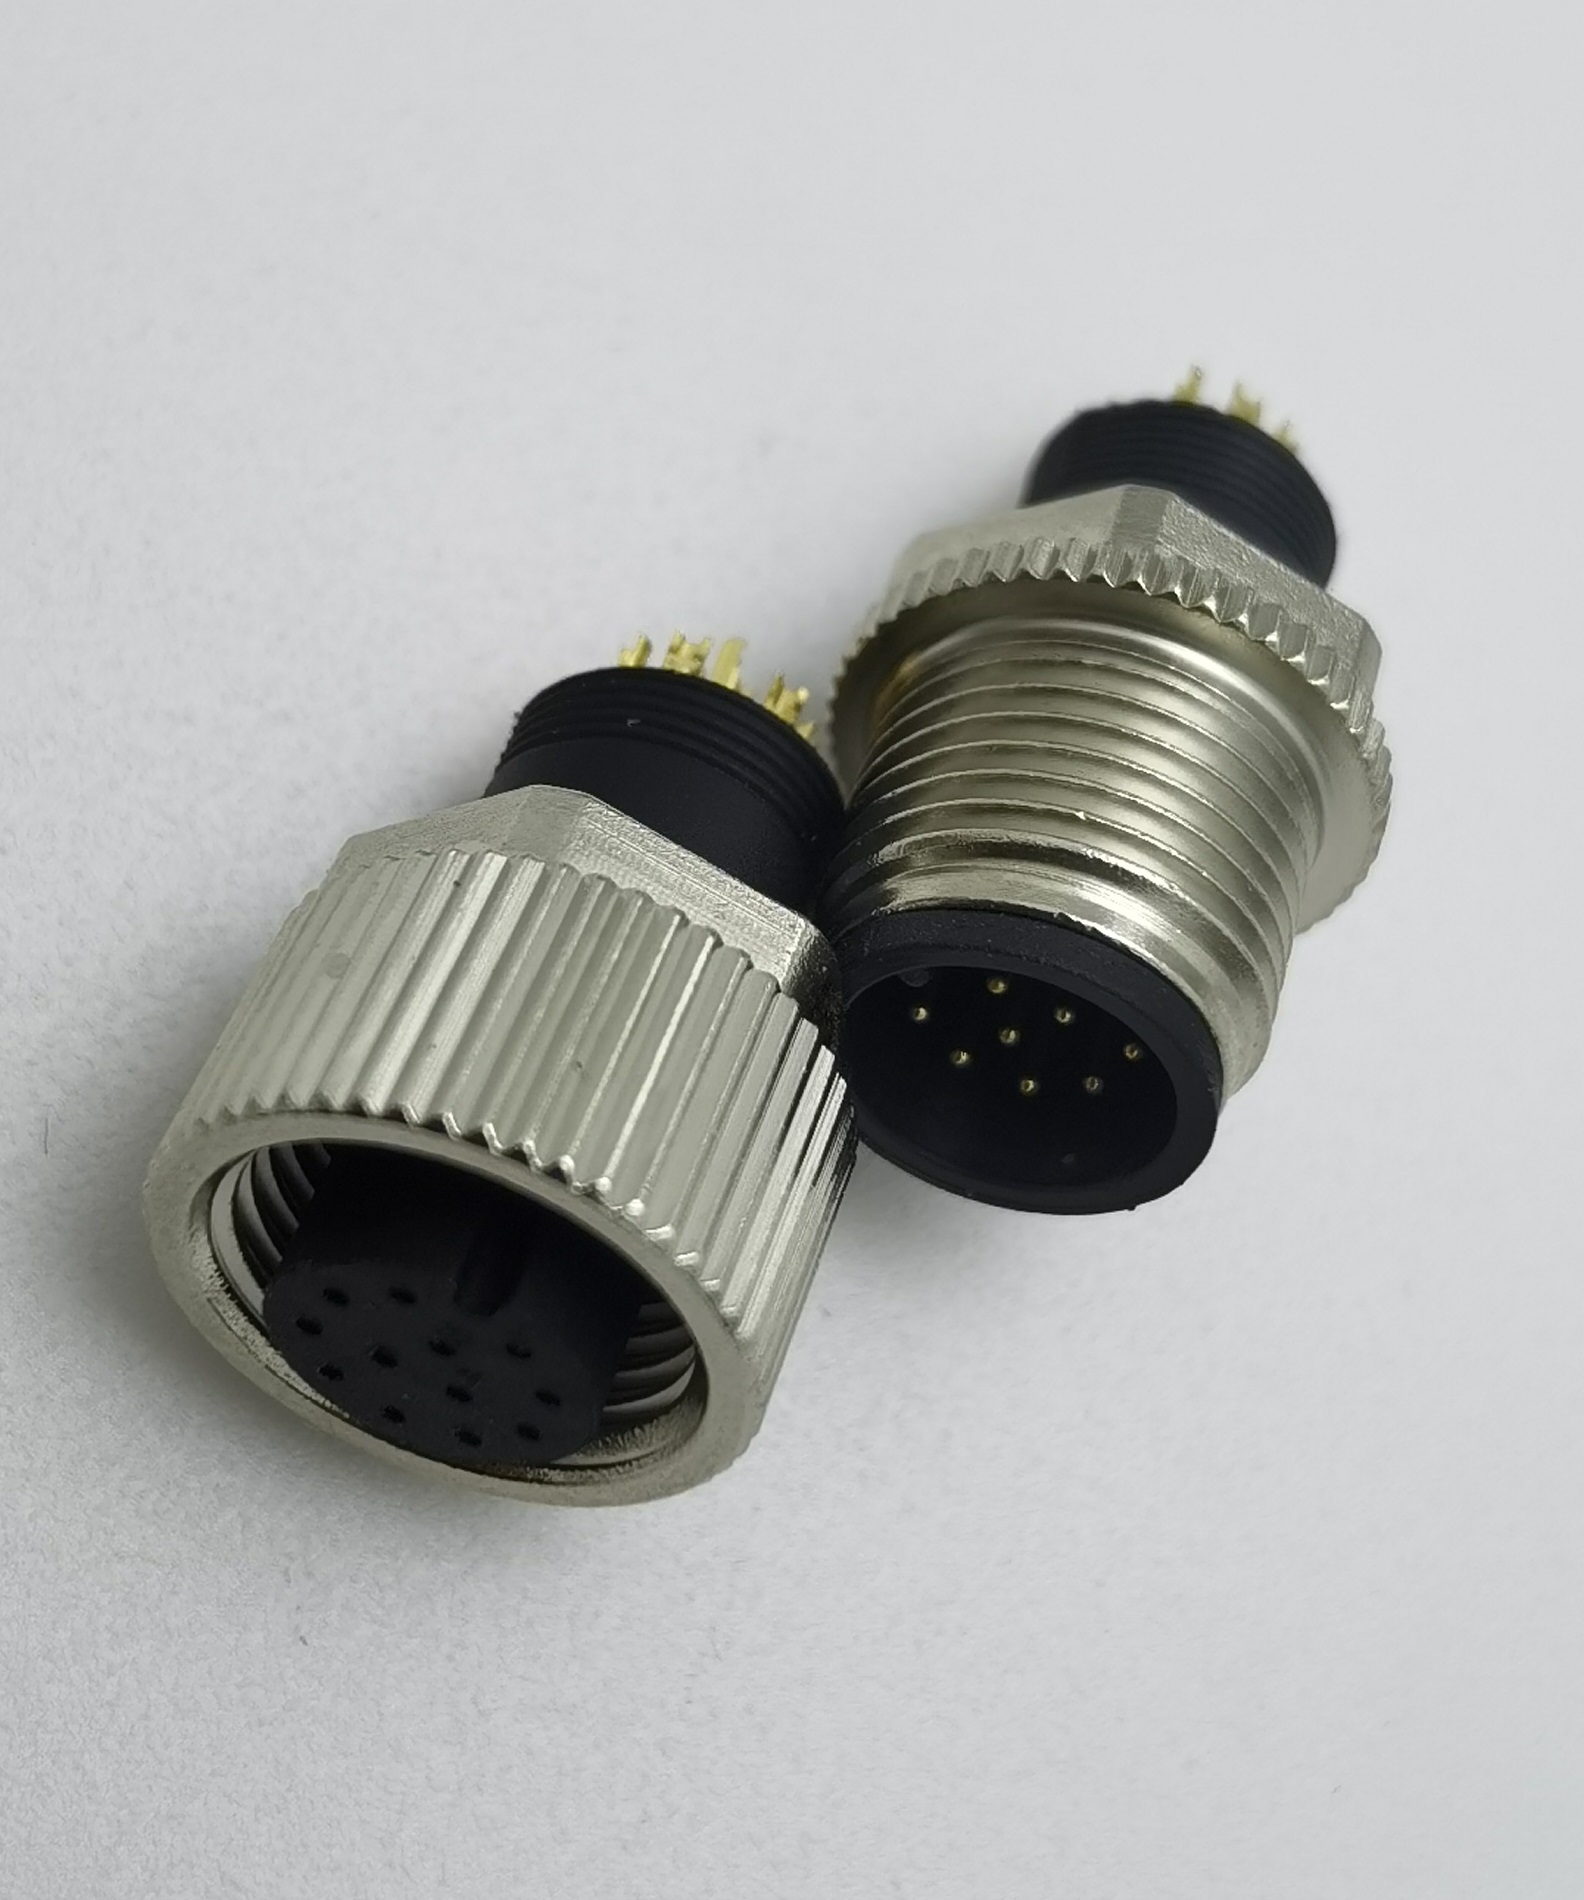 Industrial waterproof M12 circular connector 12Pin male female connector